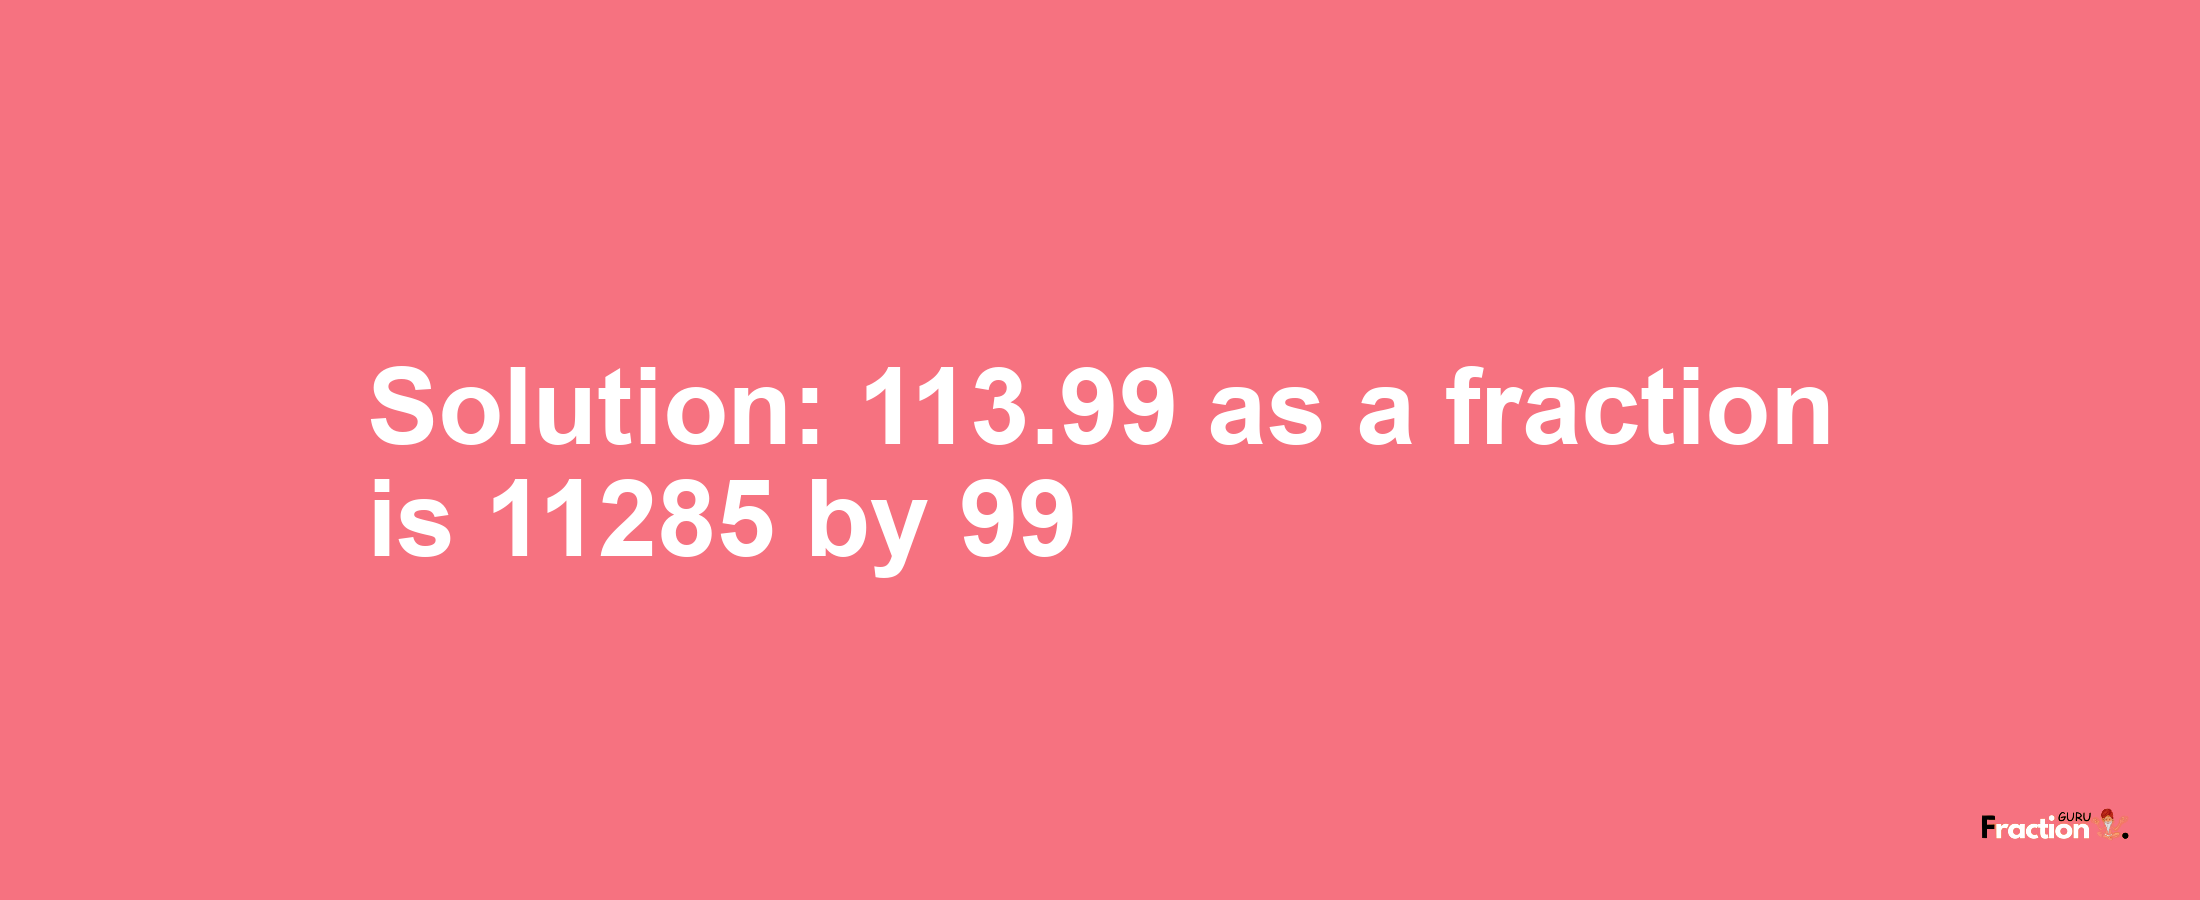 Solution:113.99 as a fraction is 11285/99